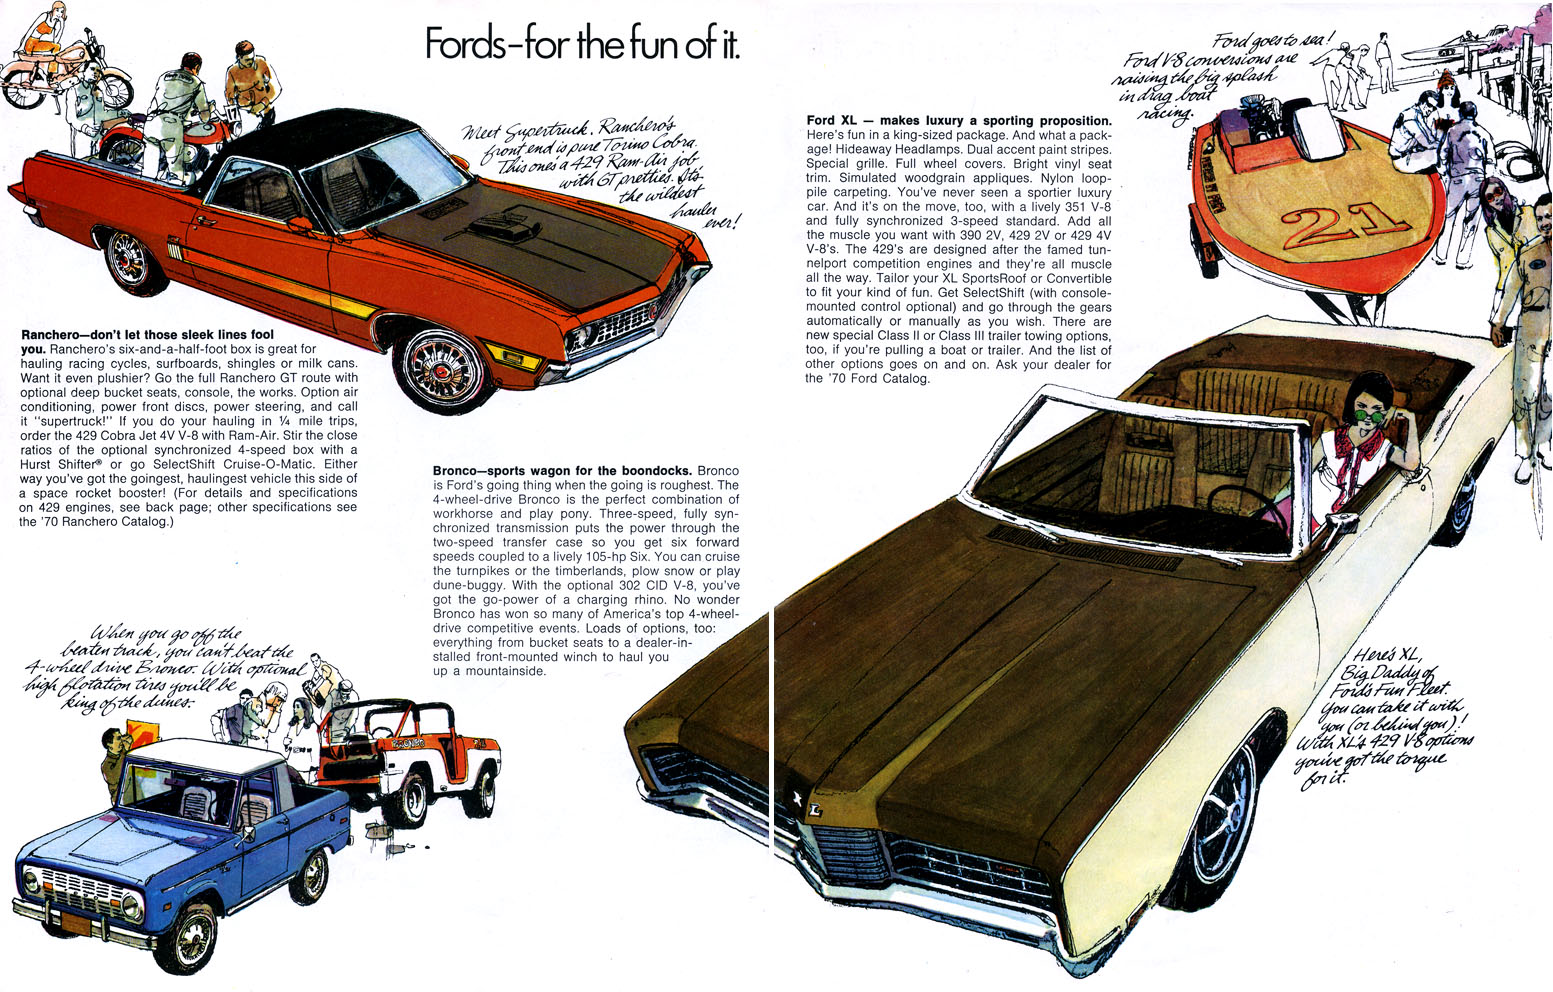 1970 Ford Performance Buyers Digest-12-13